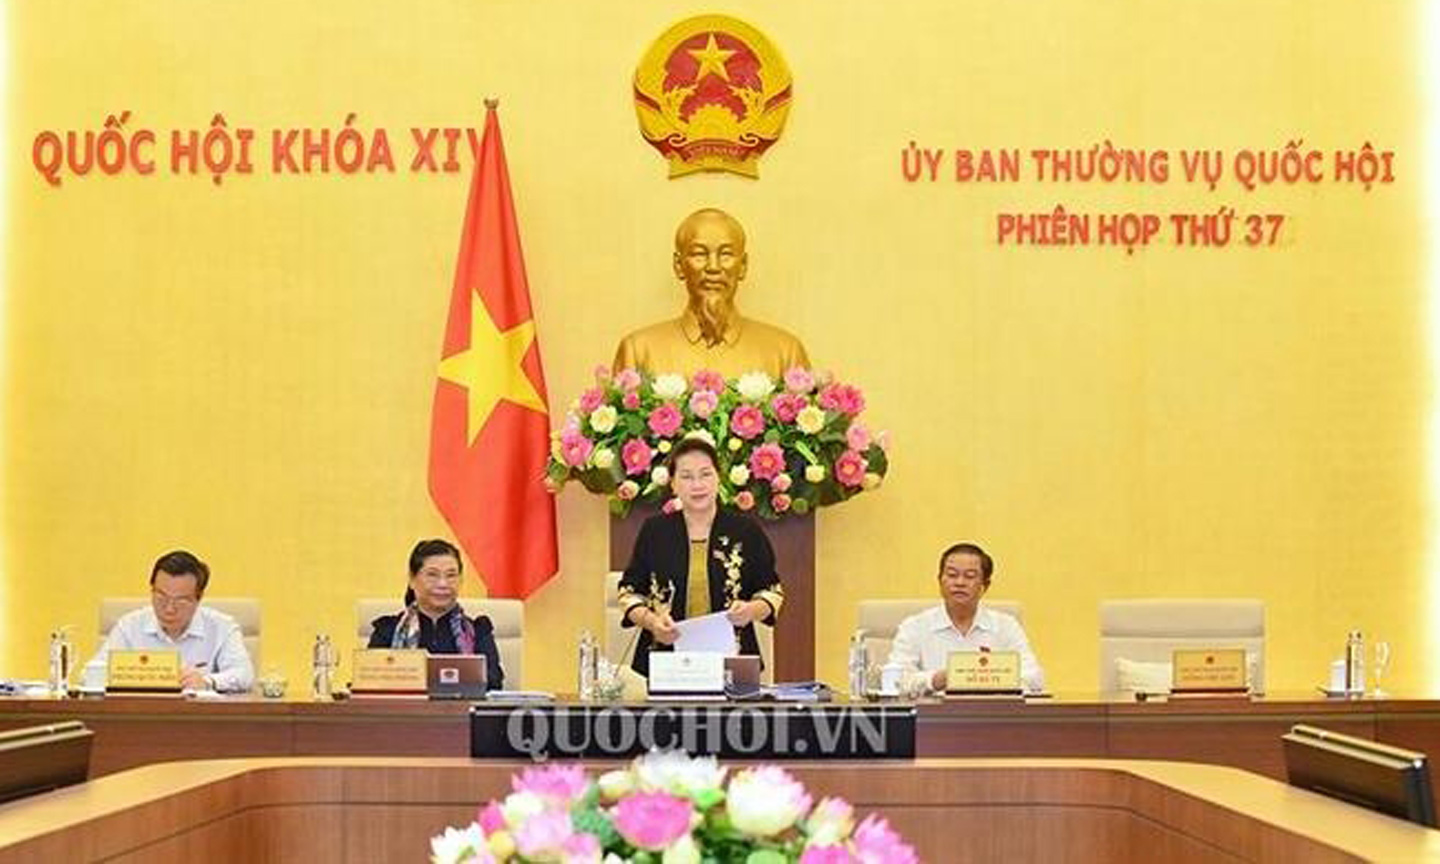 The first day of the National Assembly Standing Committee's 37th meeting (Photo: Quochoi.vn)